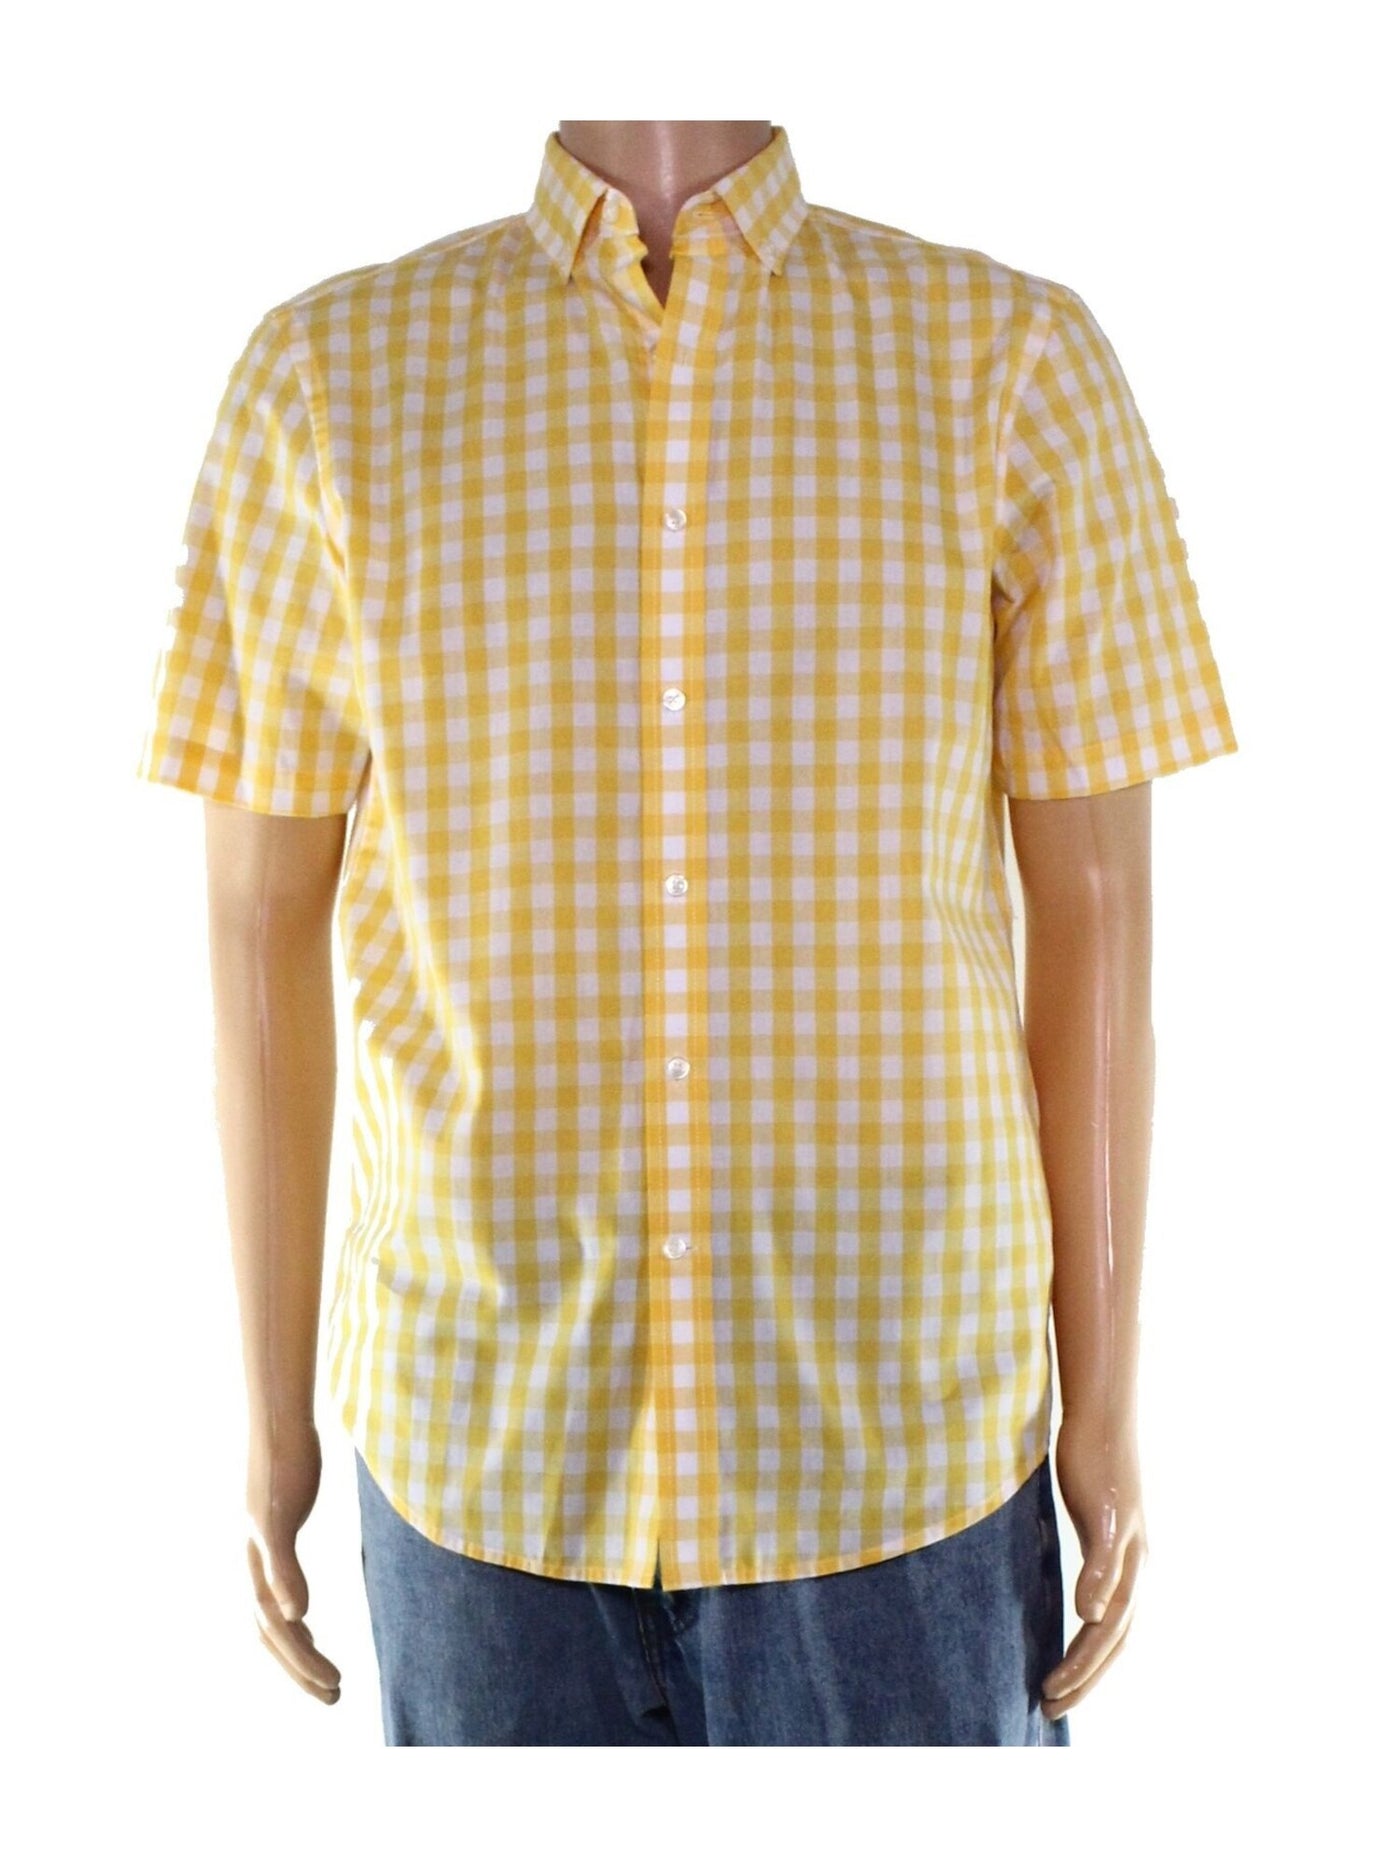 CLUBROOM Mens Yellow Multi-Check Collared Classic Fit Dress Shirt XXL